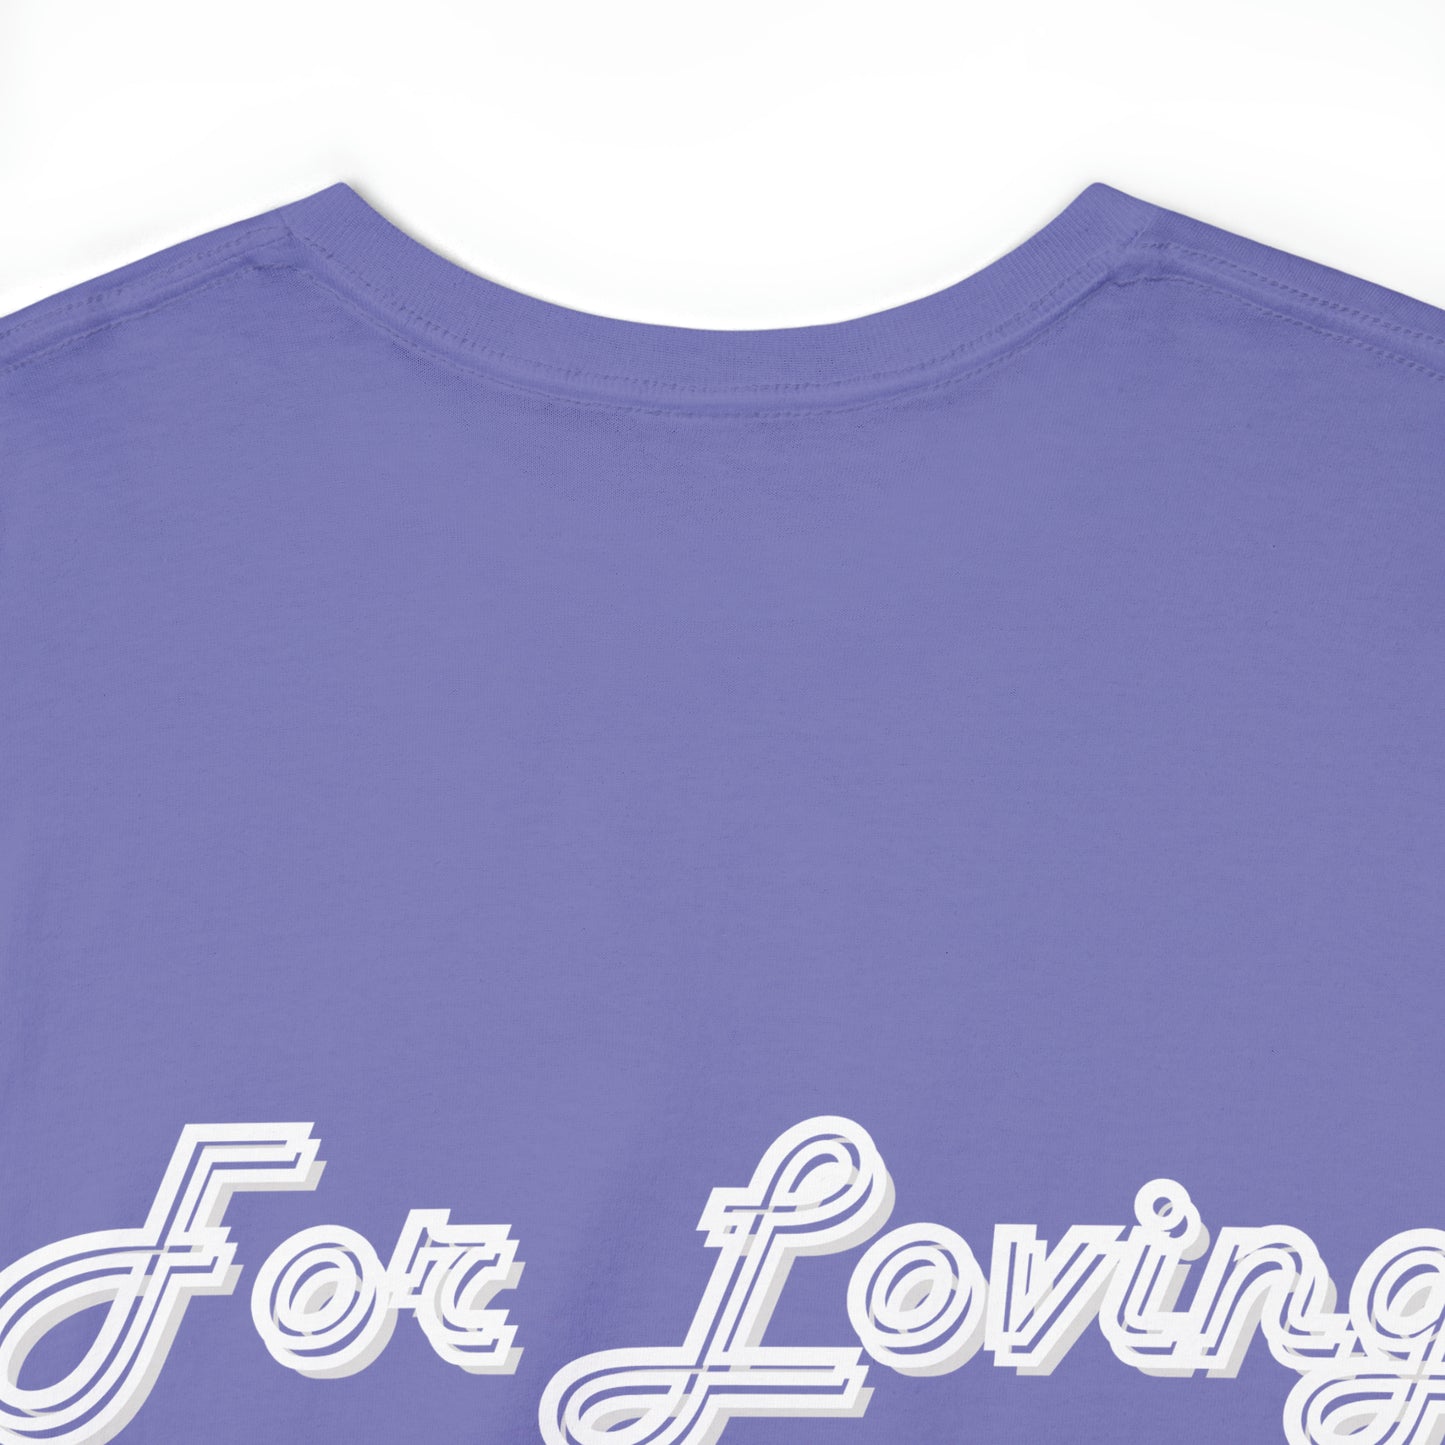 Violet FLY Unisex Tee